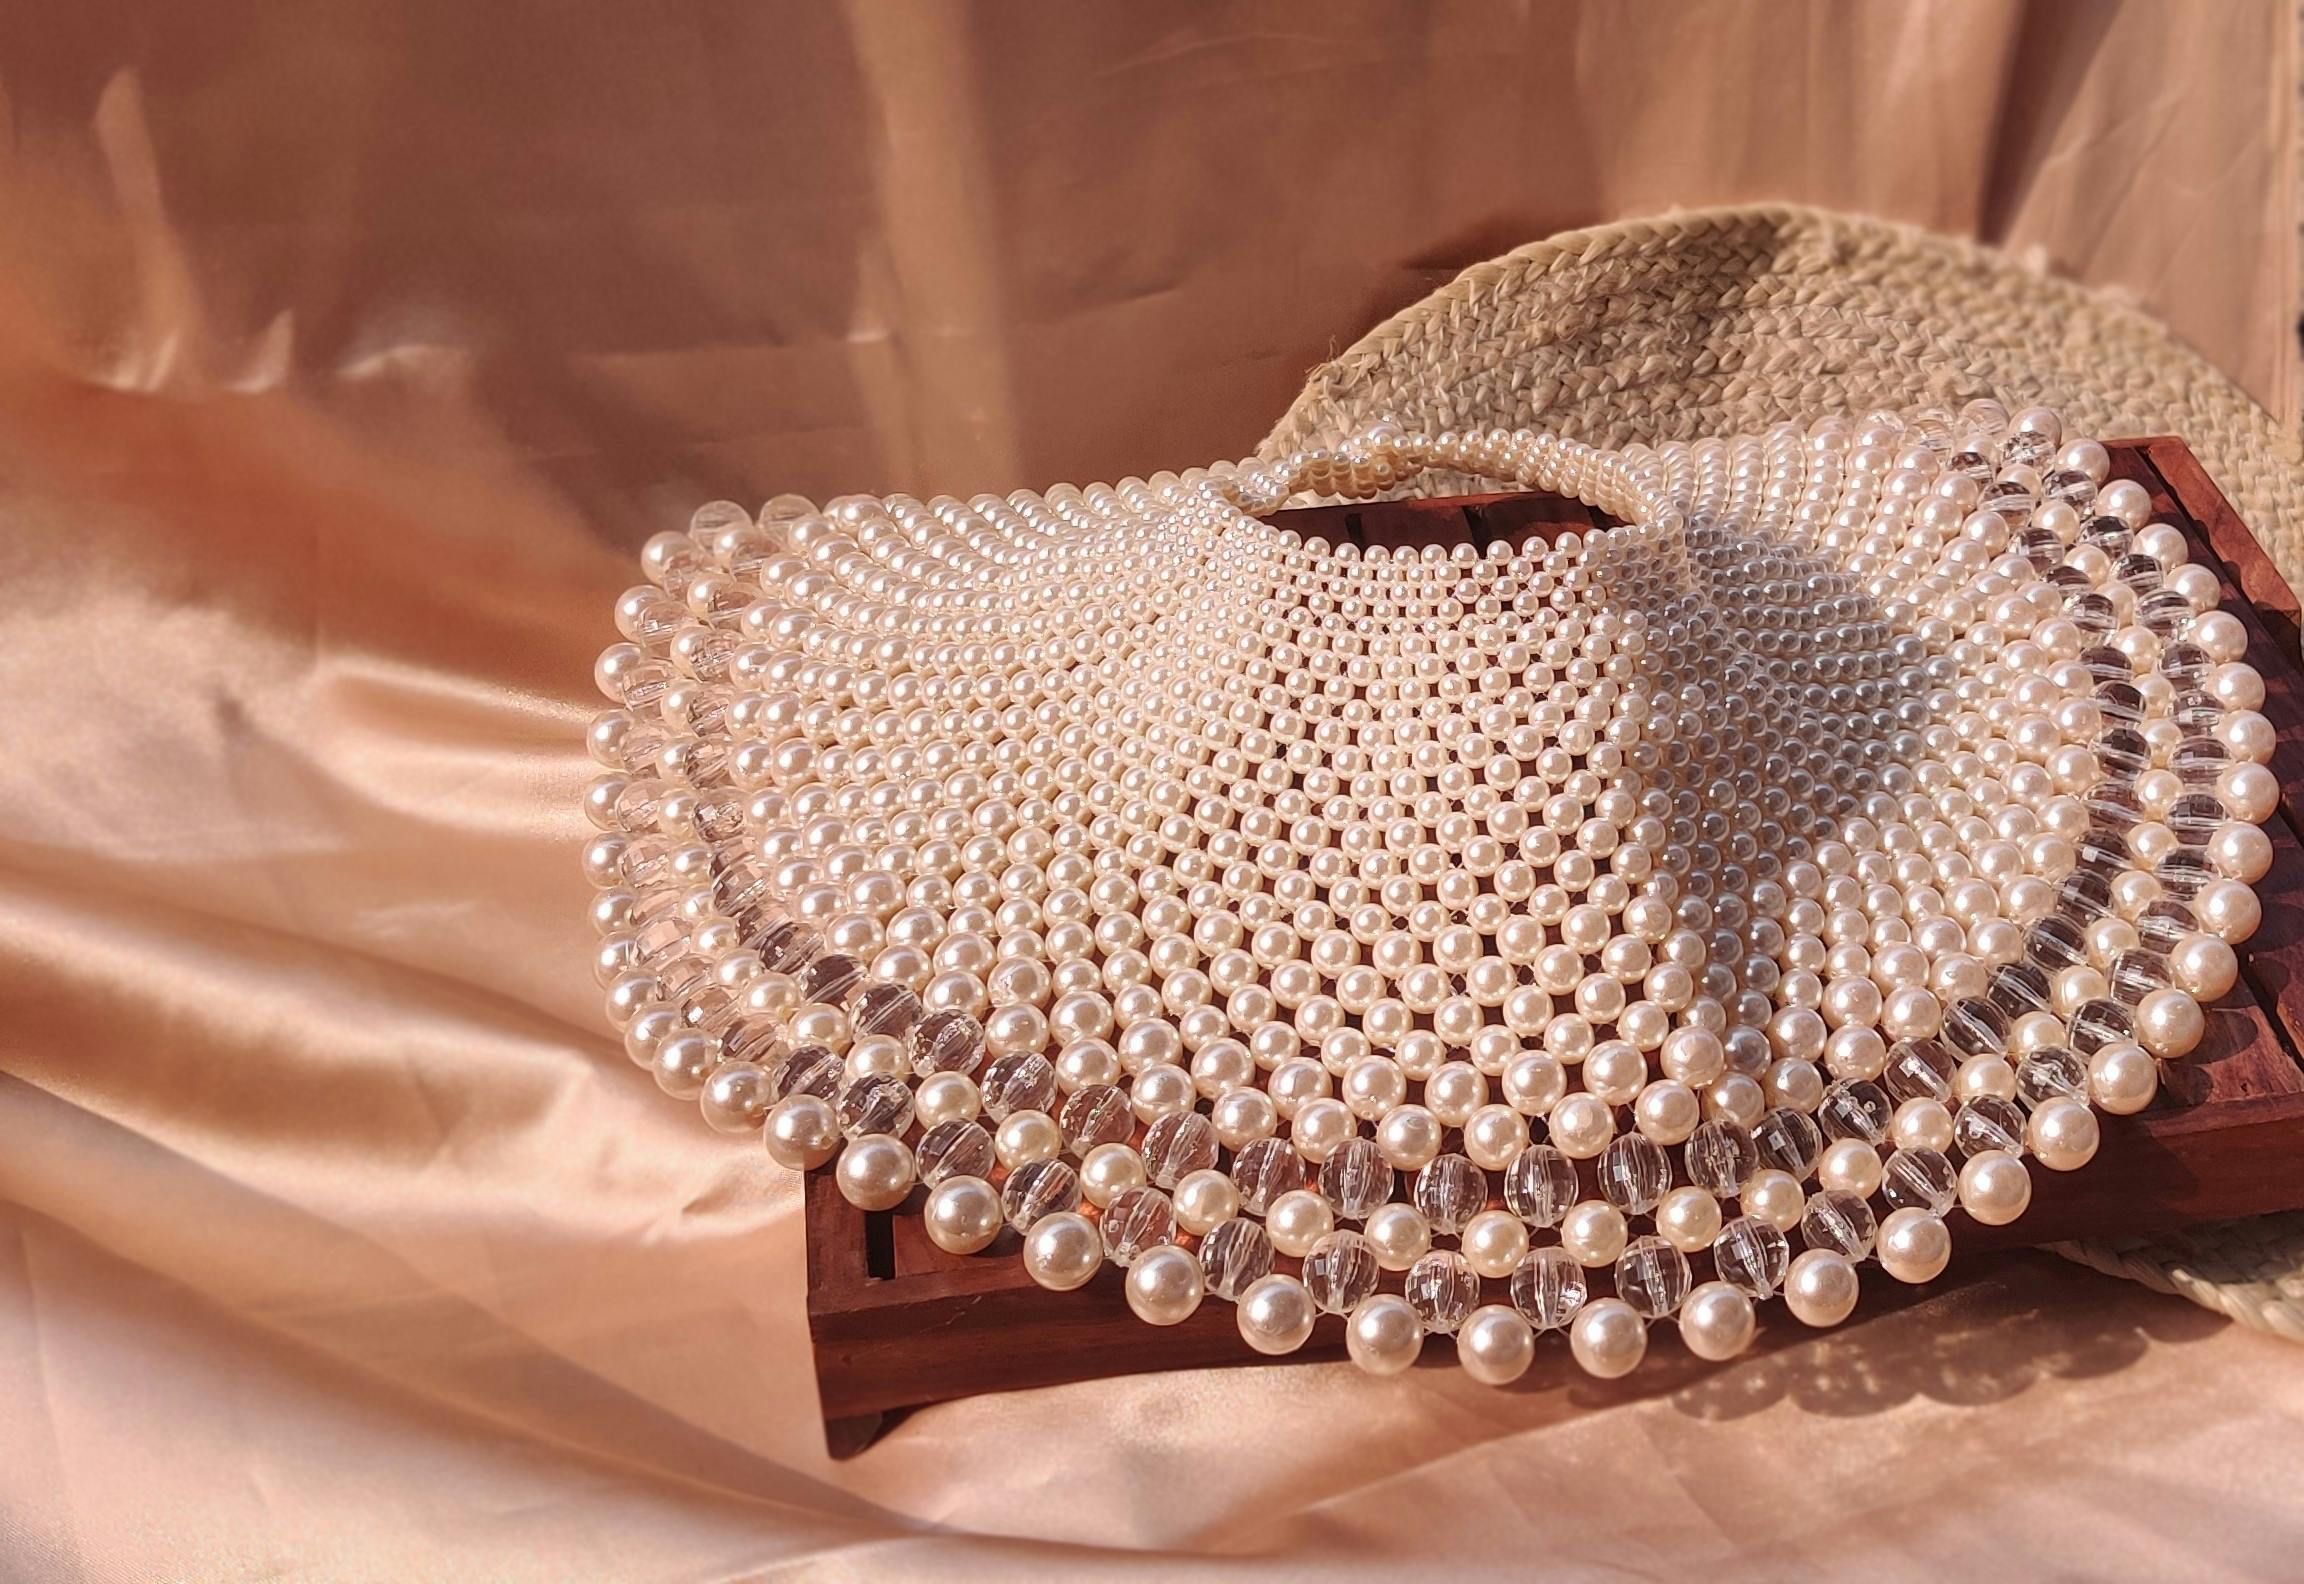 Thumbnail preview #2 for The DEEPIKA Pearl Necklace